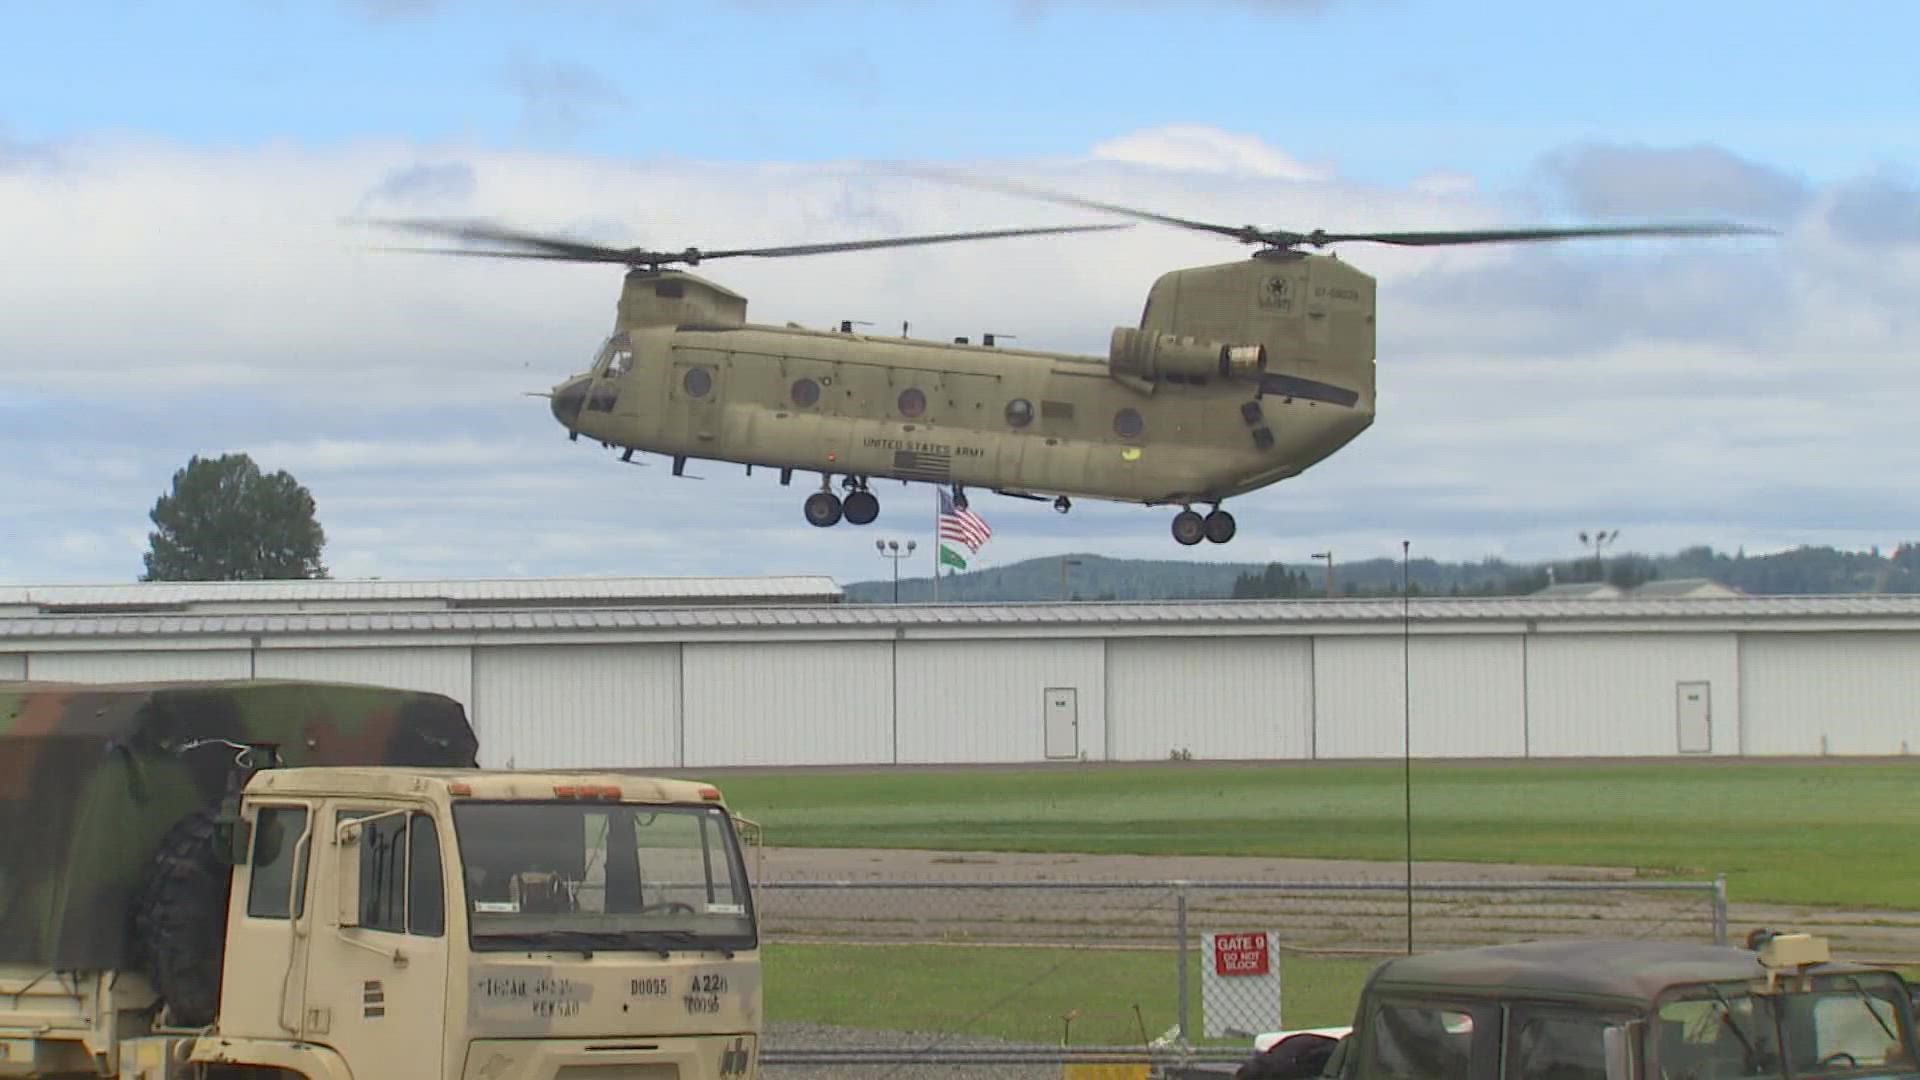 On Wednesday, military crews worked on refueling helicopters outside of Joint Base Lewis-McChord.